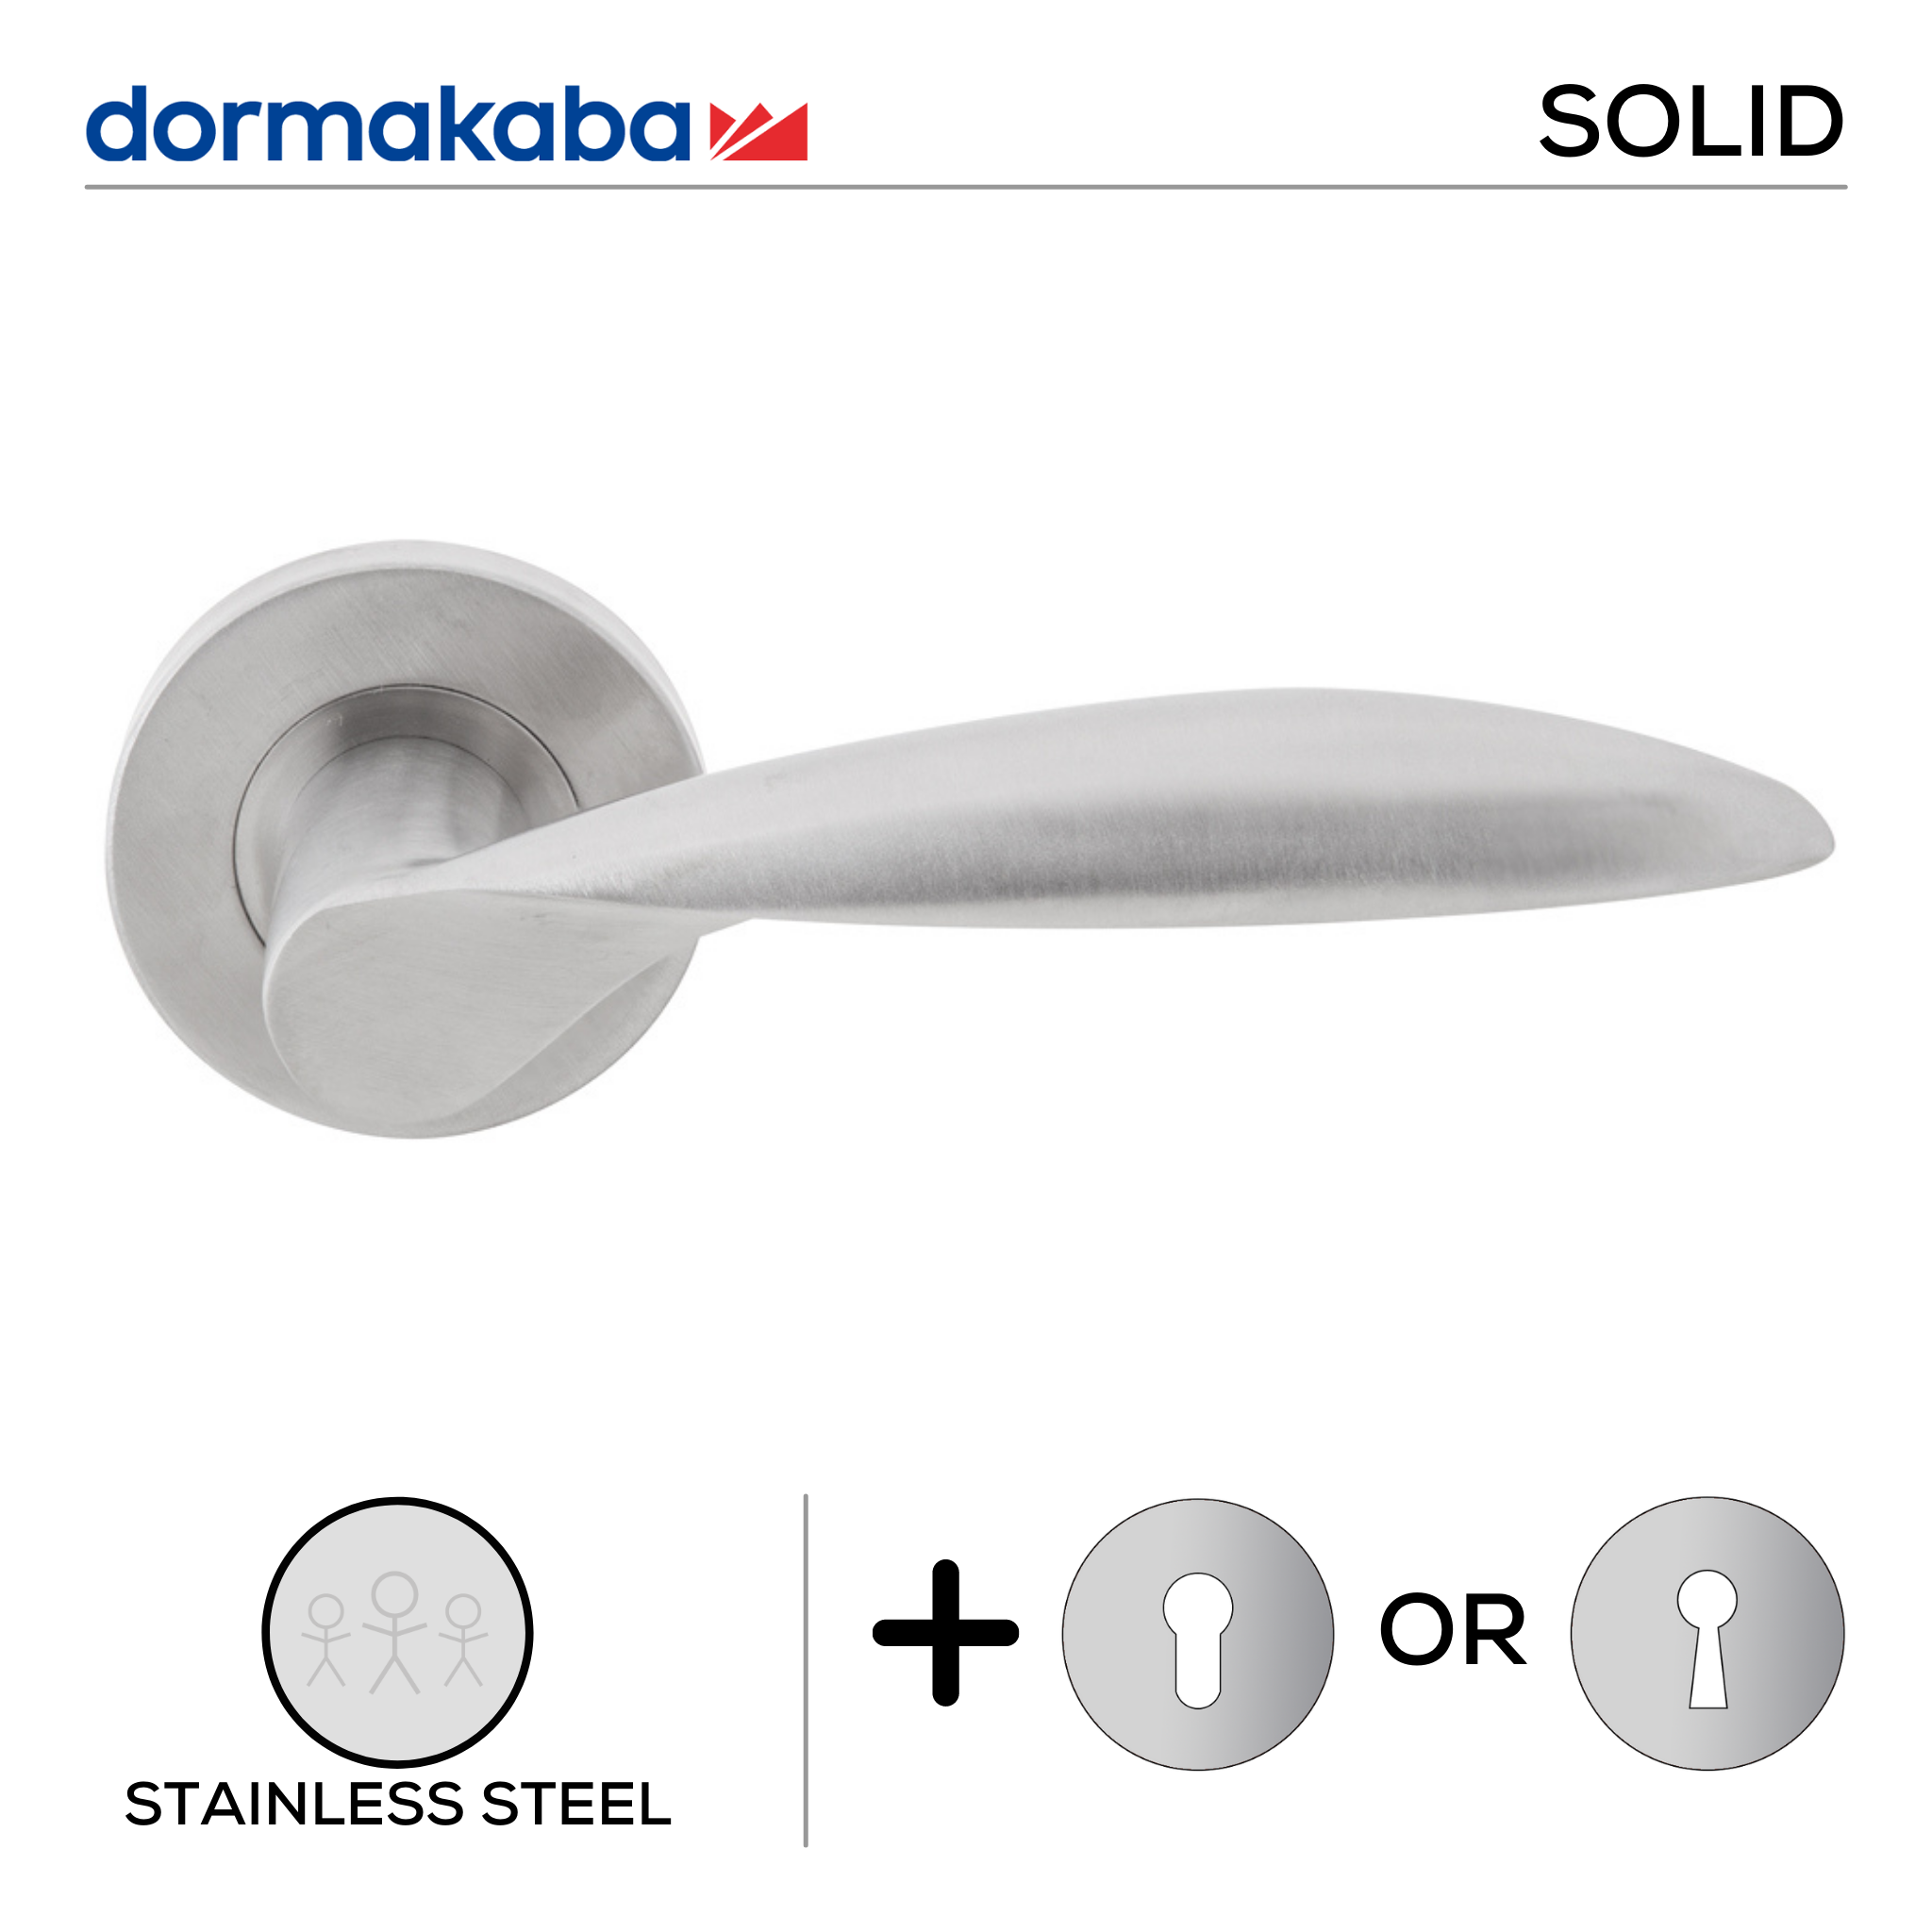 SH 811, Lever Handles, Solid, On Round Rose, With Escutcheons, 143mm (l), Stainless Steel, DORMAKABA